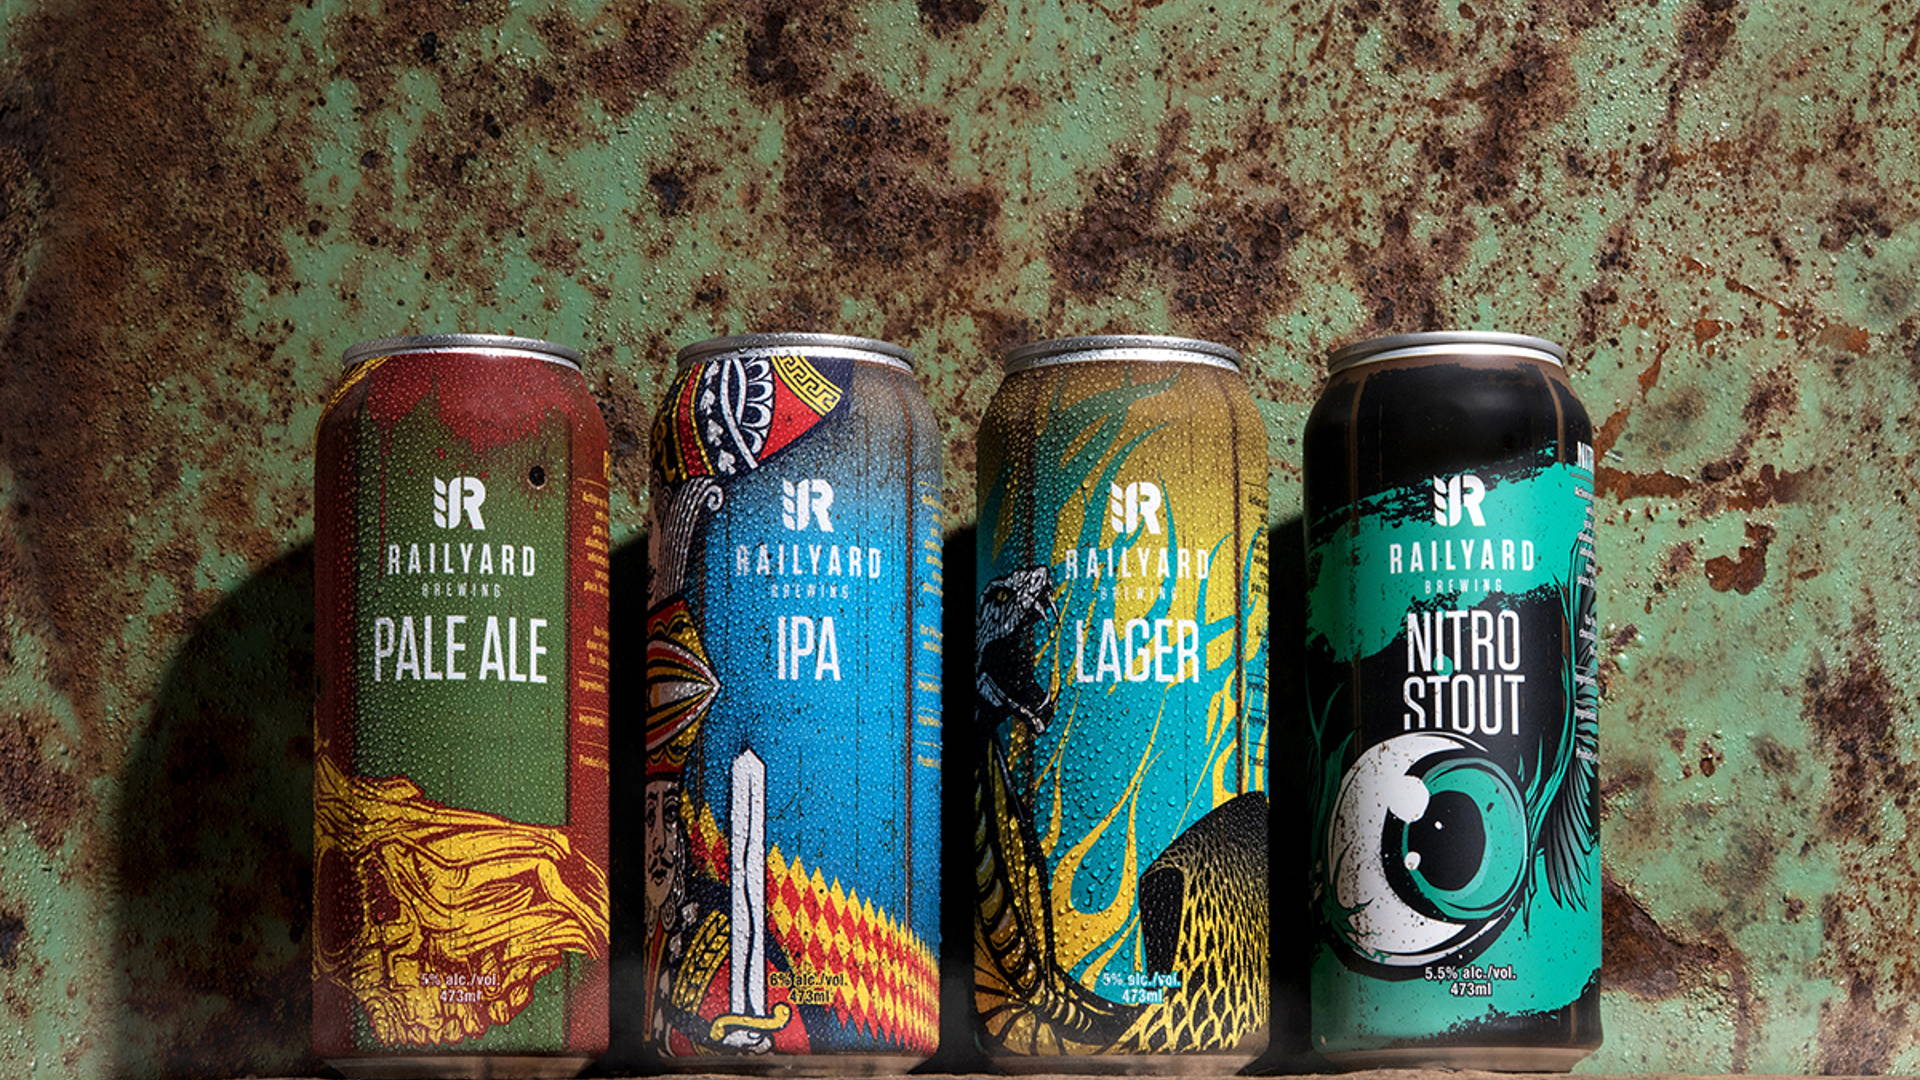 Featured image for Railyard Brewing’s Cans Were Inspired By Graffiti and Street Art